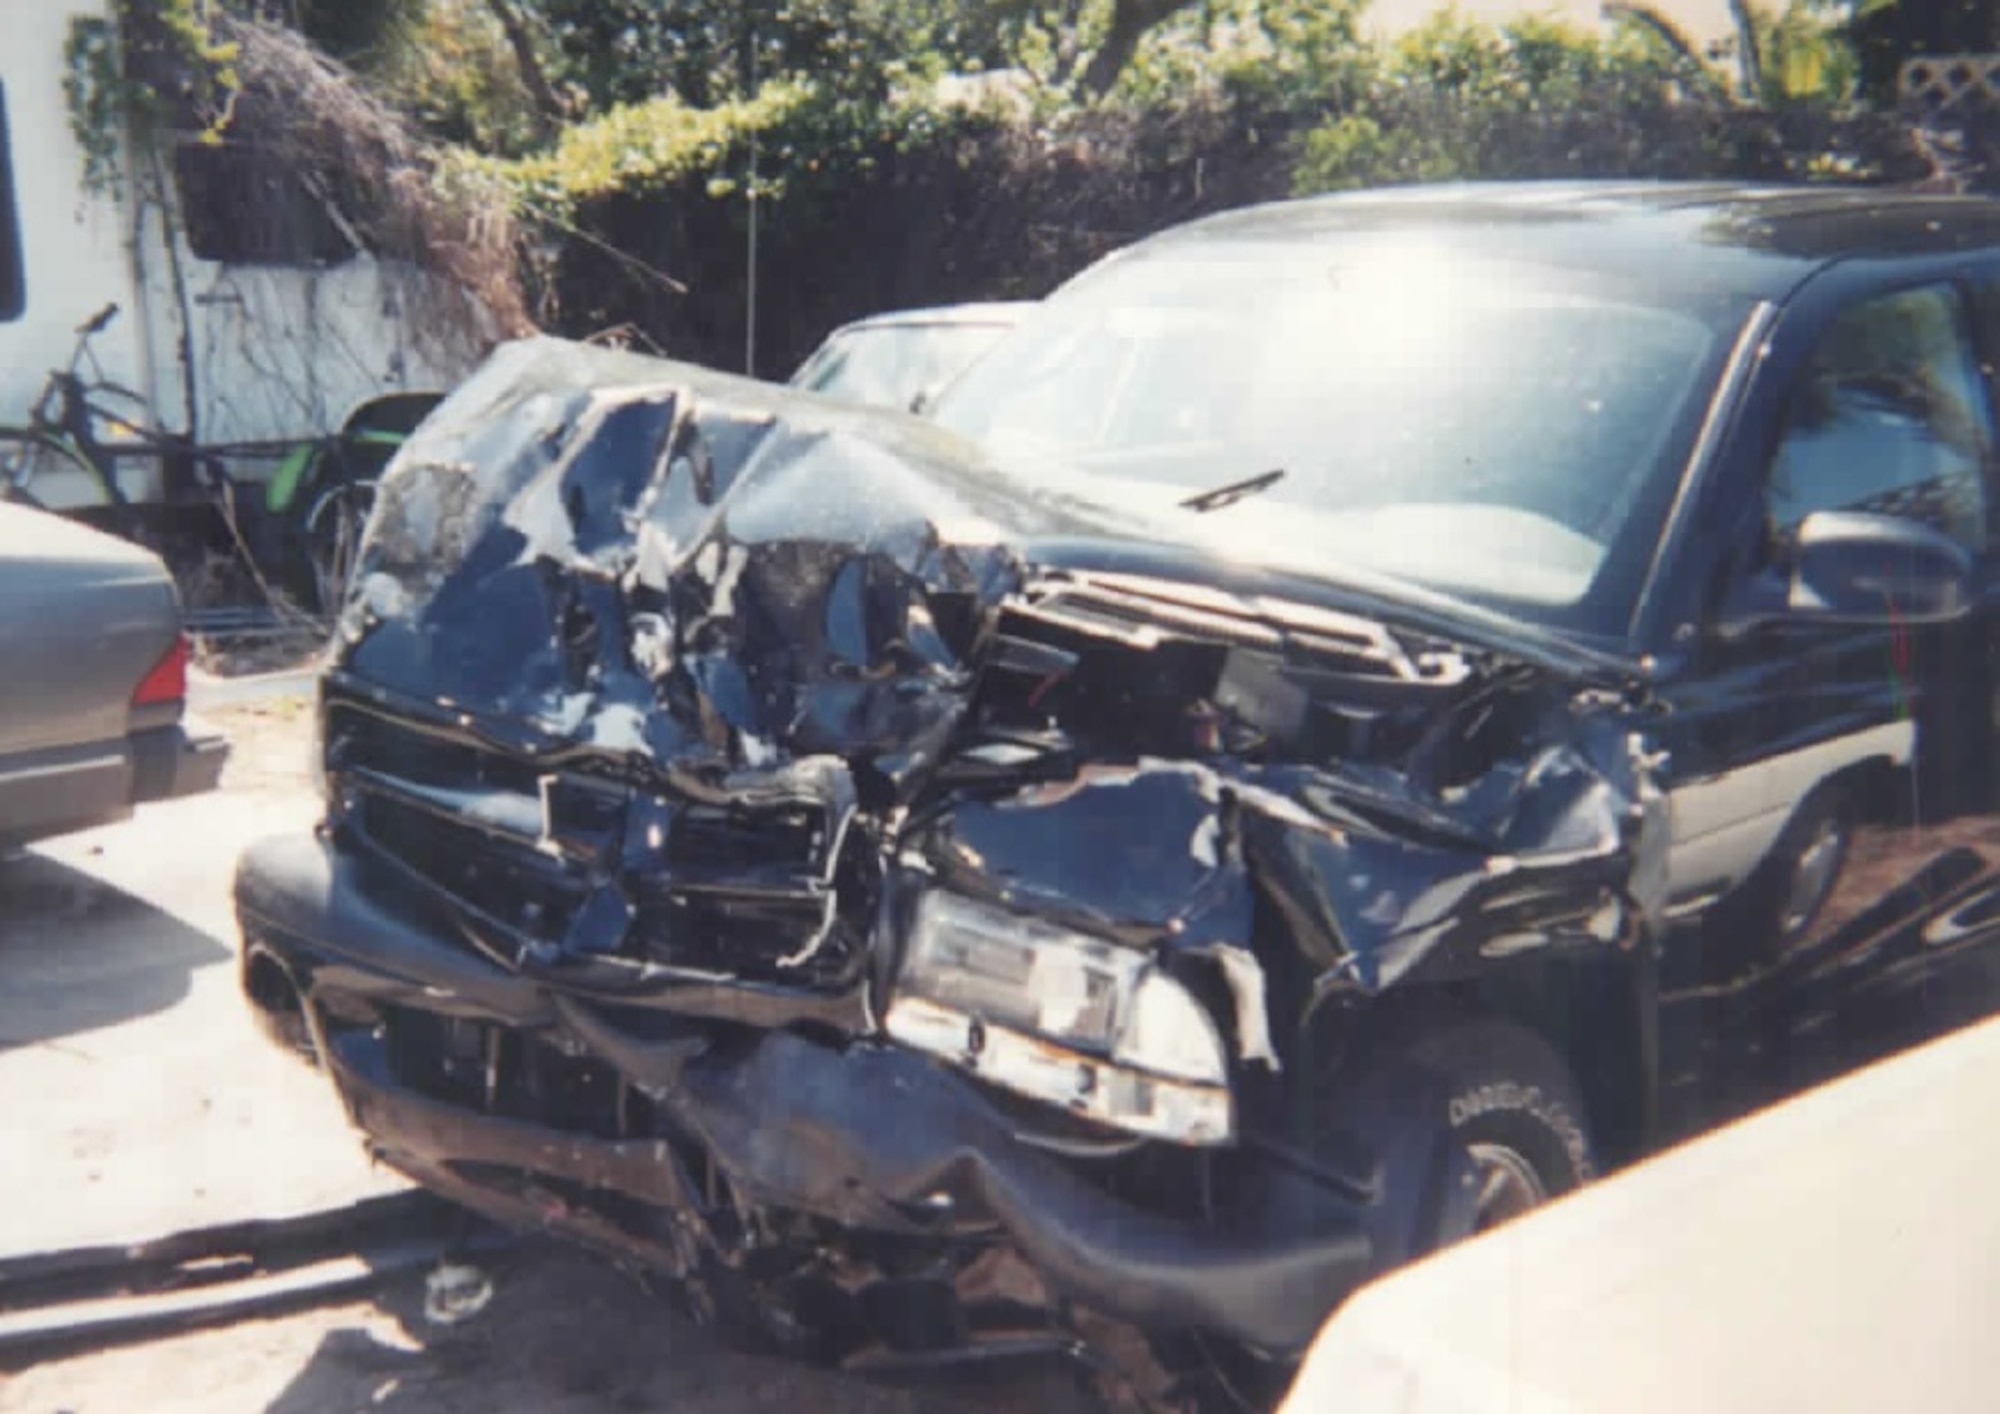 Pictured is the vehicle that hit the car of Roberta Clark, 45th Space Wing Safety, at the main gate of Patrick Air Force Base, Fla., April 11, 2003. The vehicle ran the red light when Clark was exiting the main gate and crashed into her. (Courtesy photo)
